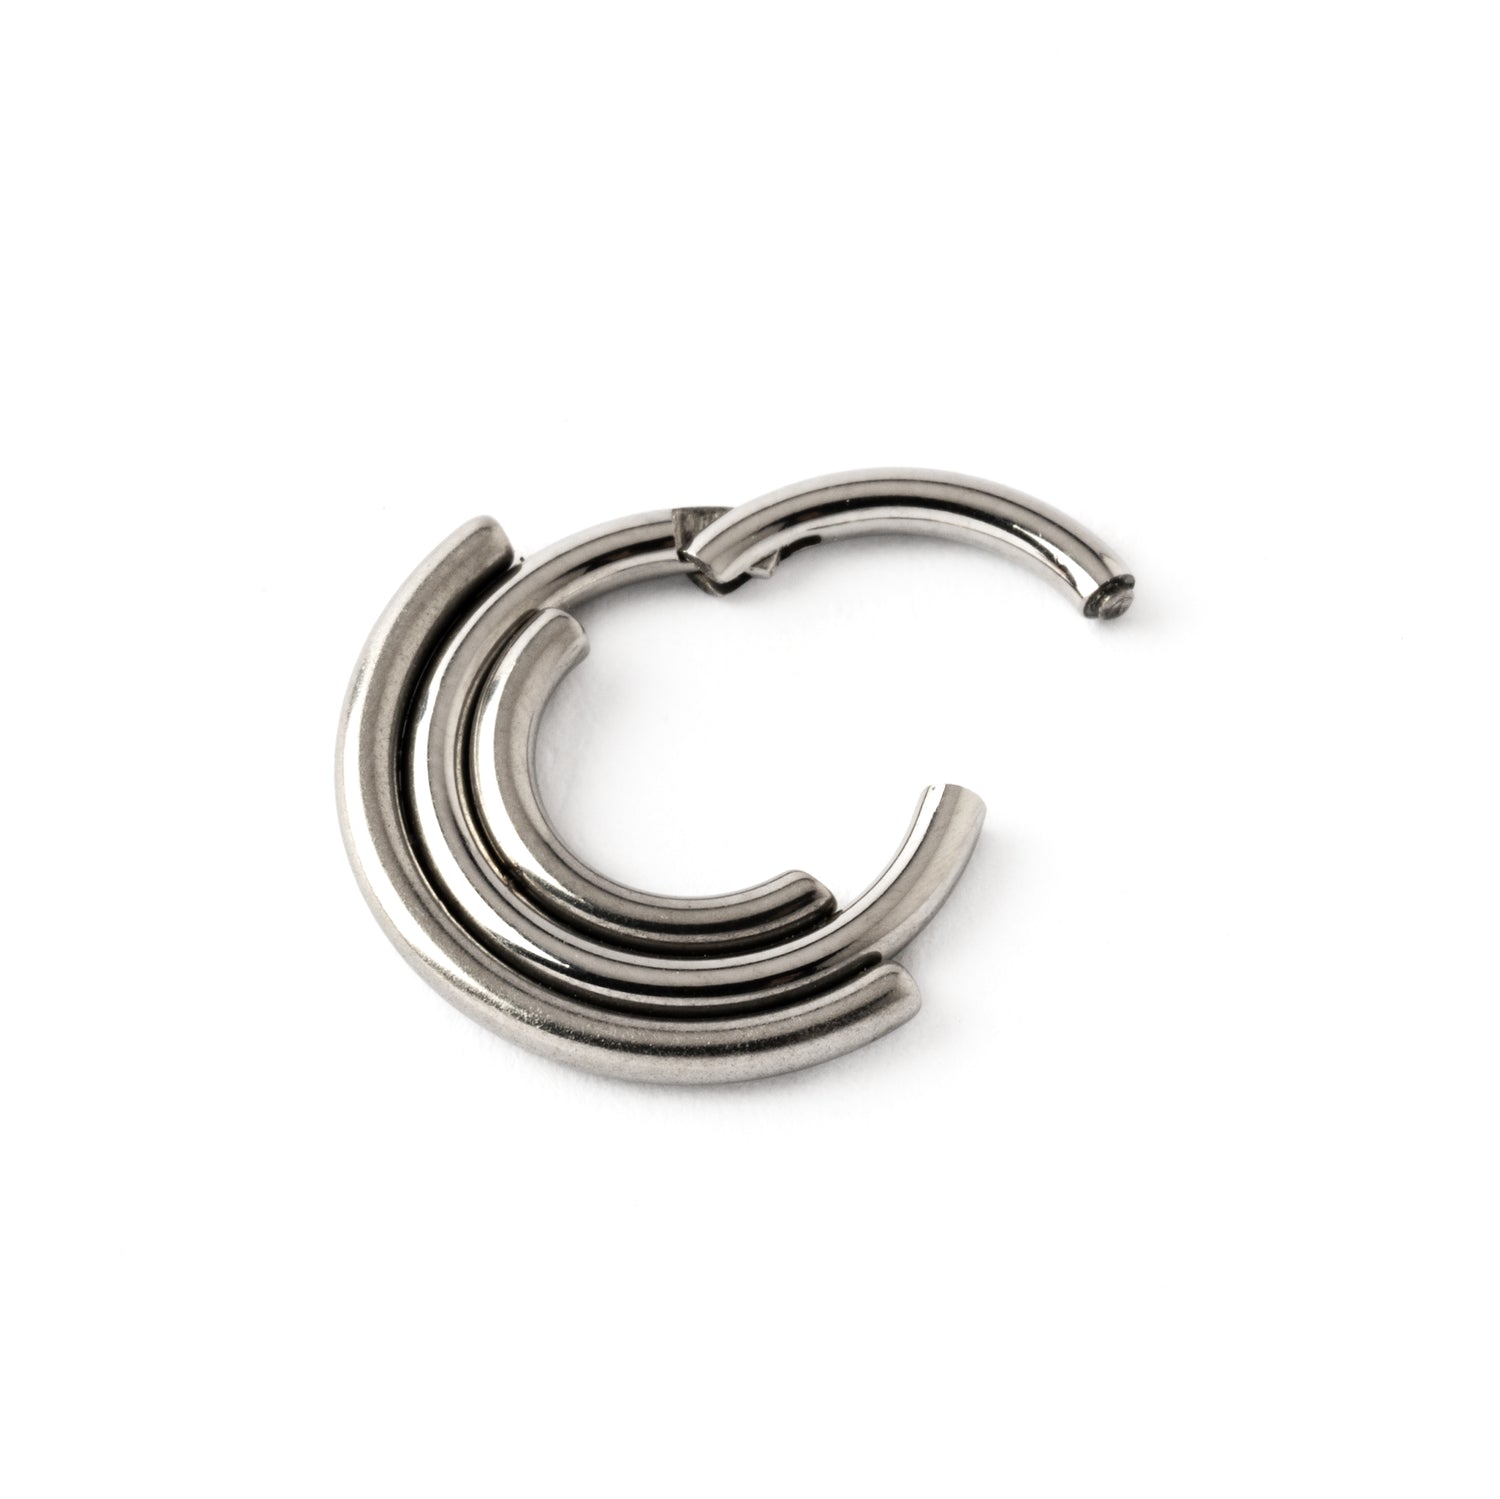 Akasha surgical steel multiple rings septum clicker side view